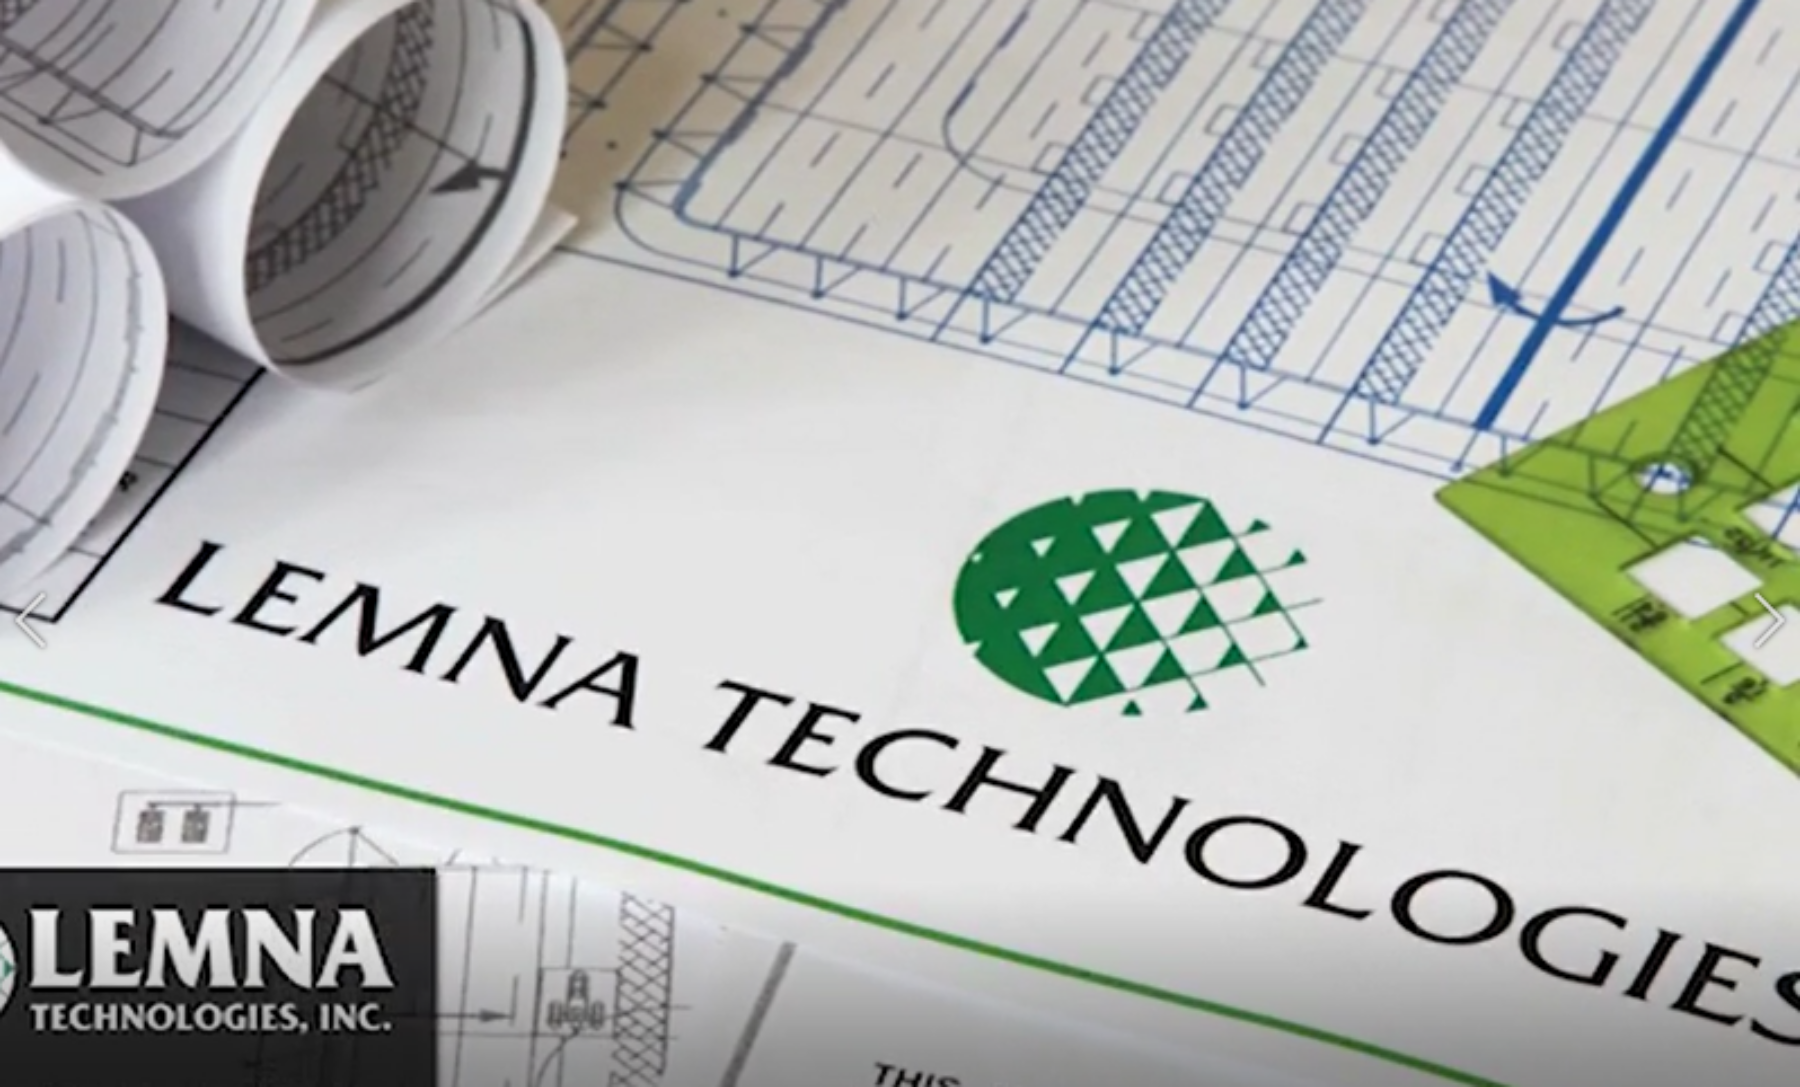 Lemna Technologies logo with brand name under green circle graphic on paper drawings of water treatment systems,